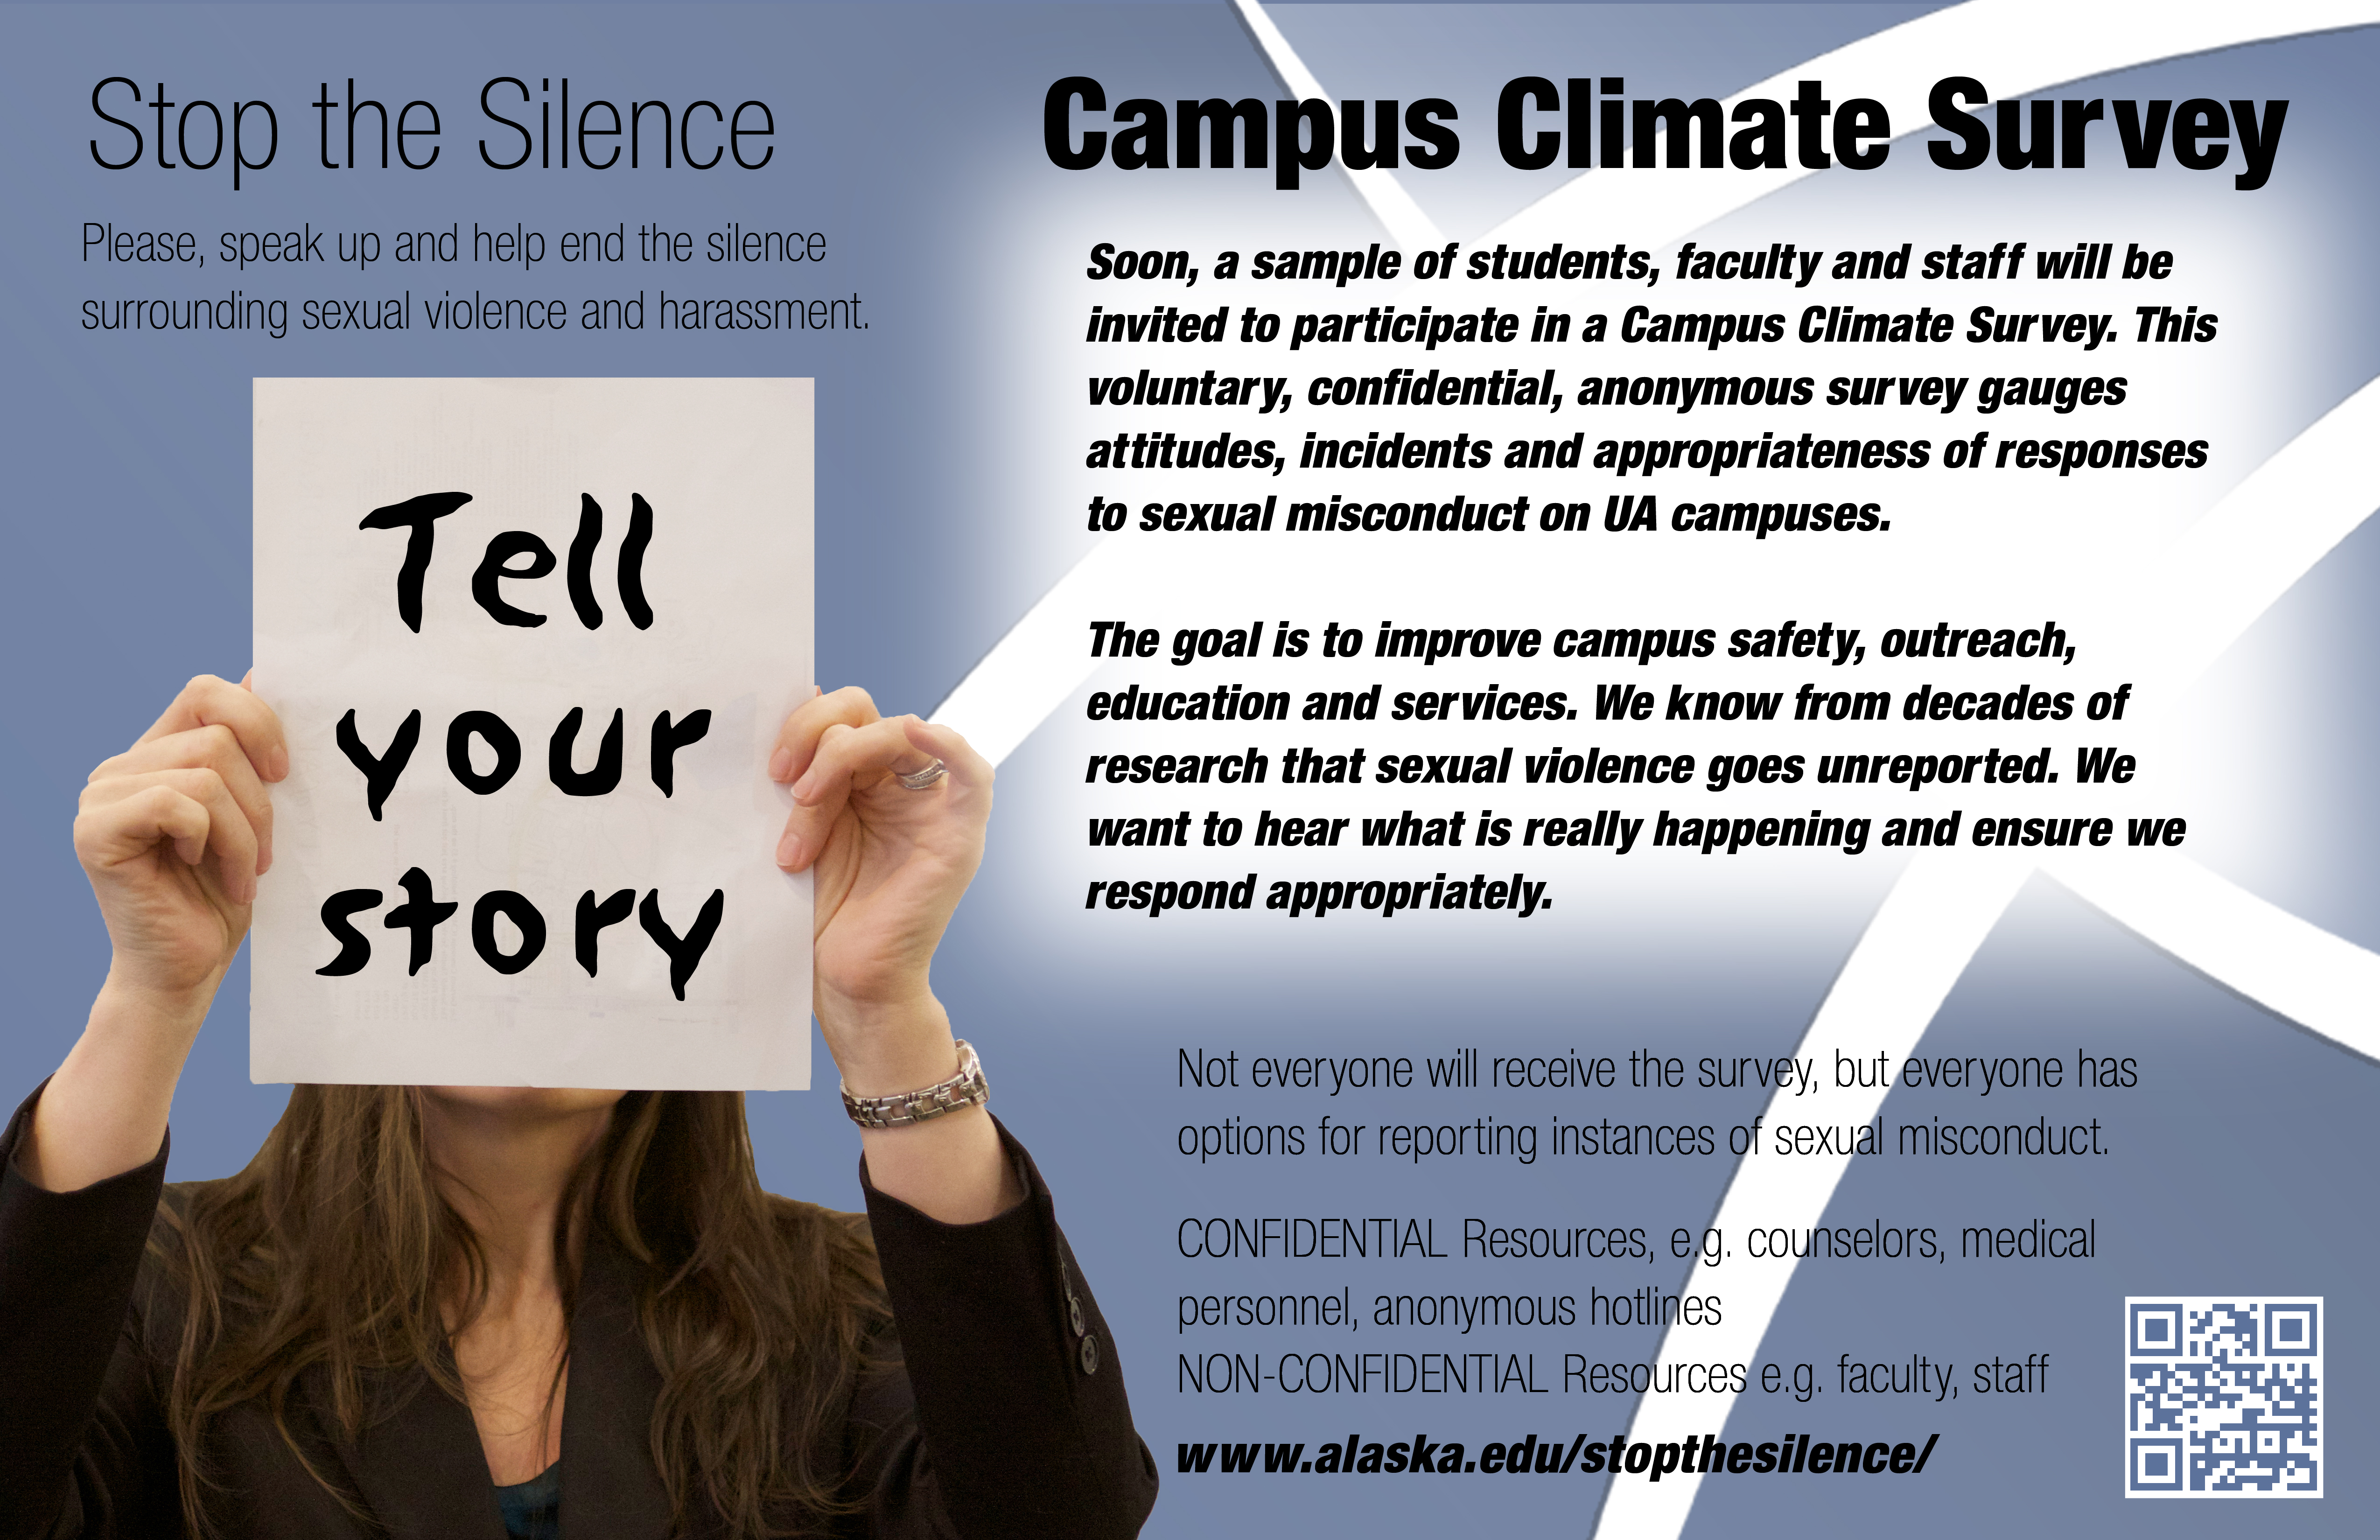 University of Alaska has this flier about the survey. (Courtesy University of Alaska)